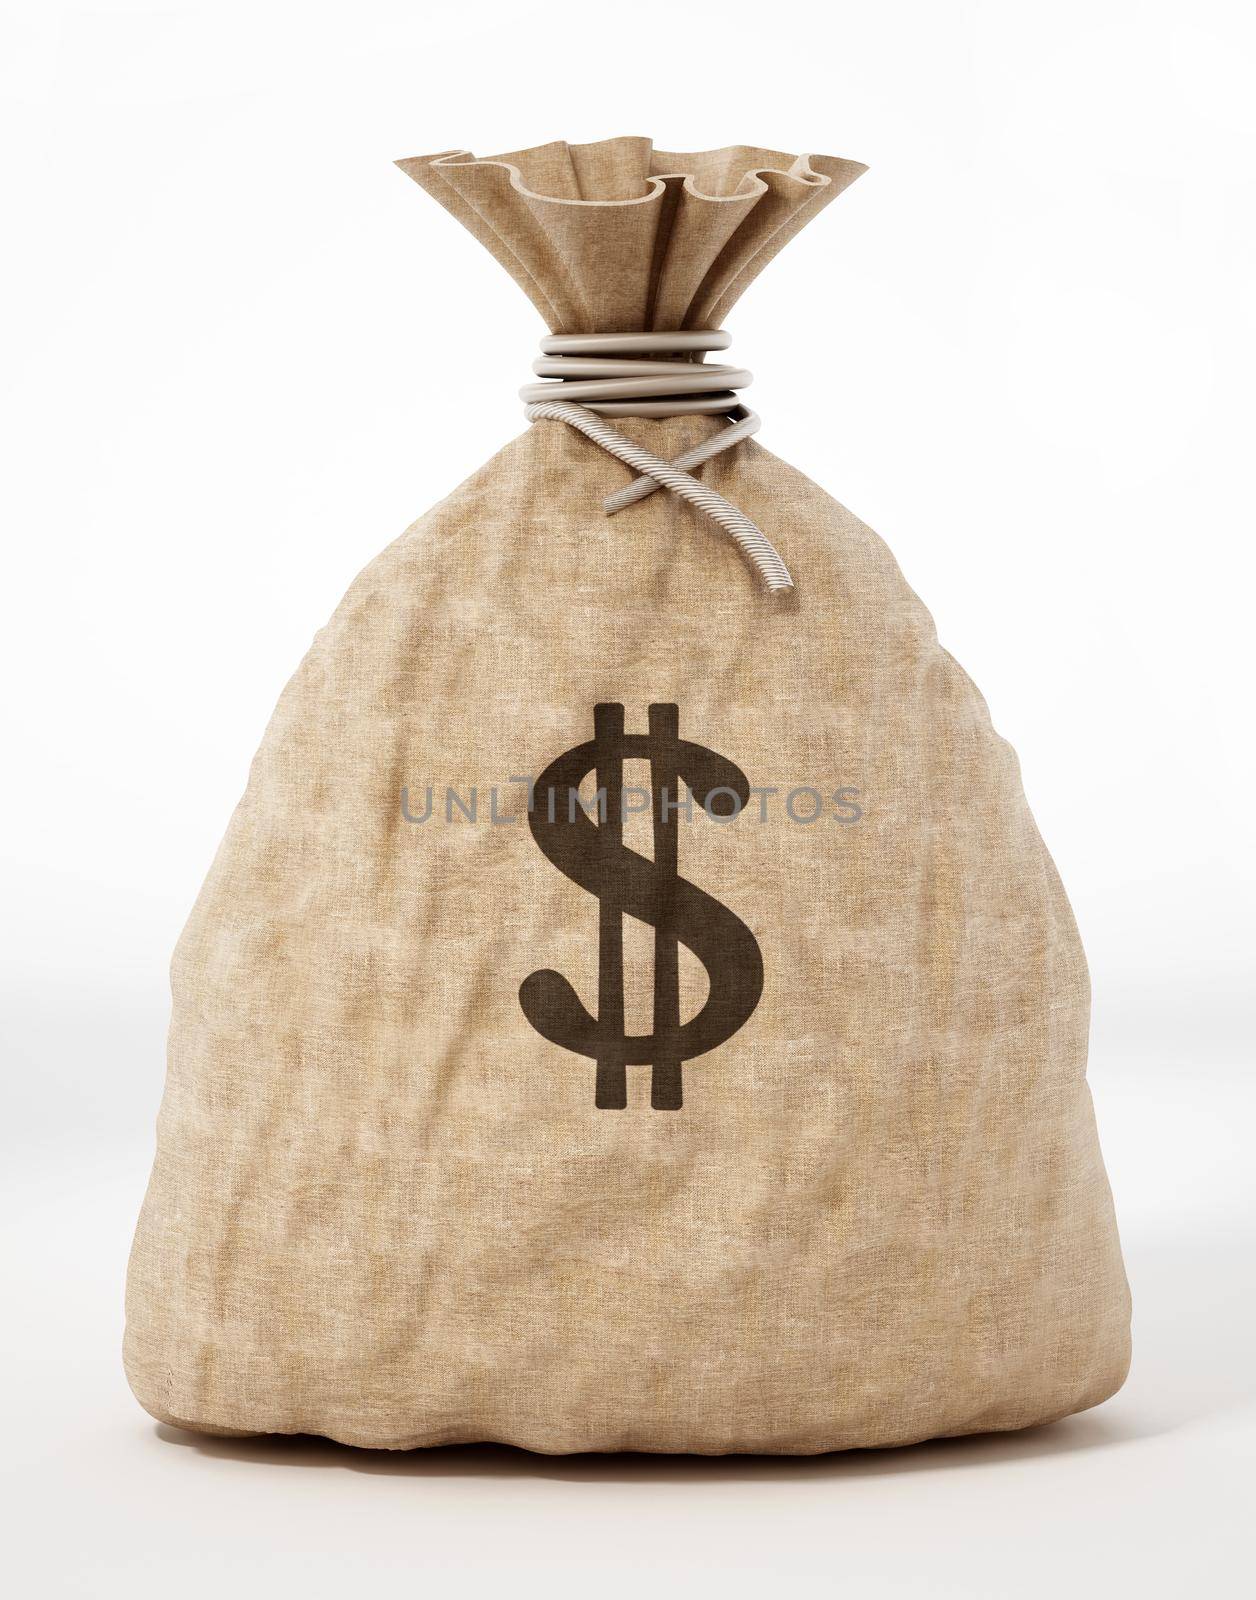 Money sack with dollar icon. 3D illustration by Simsek